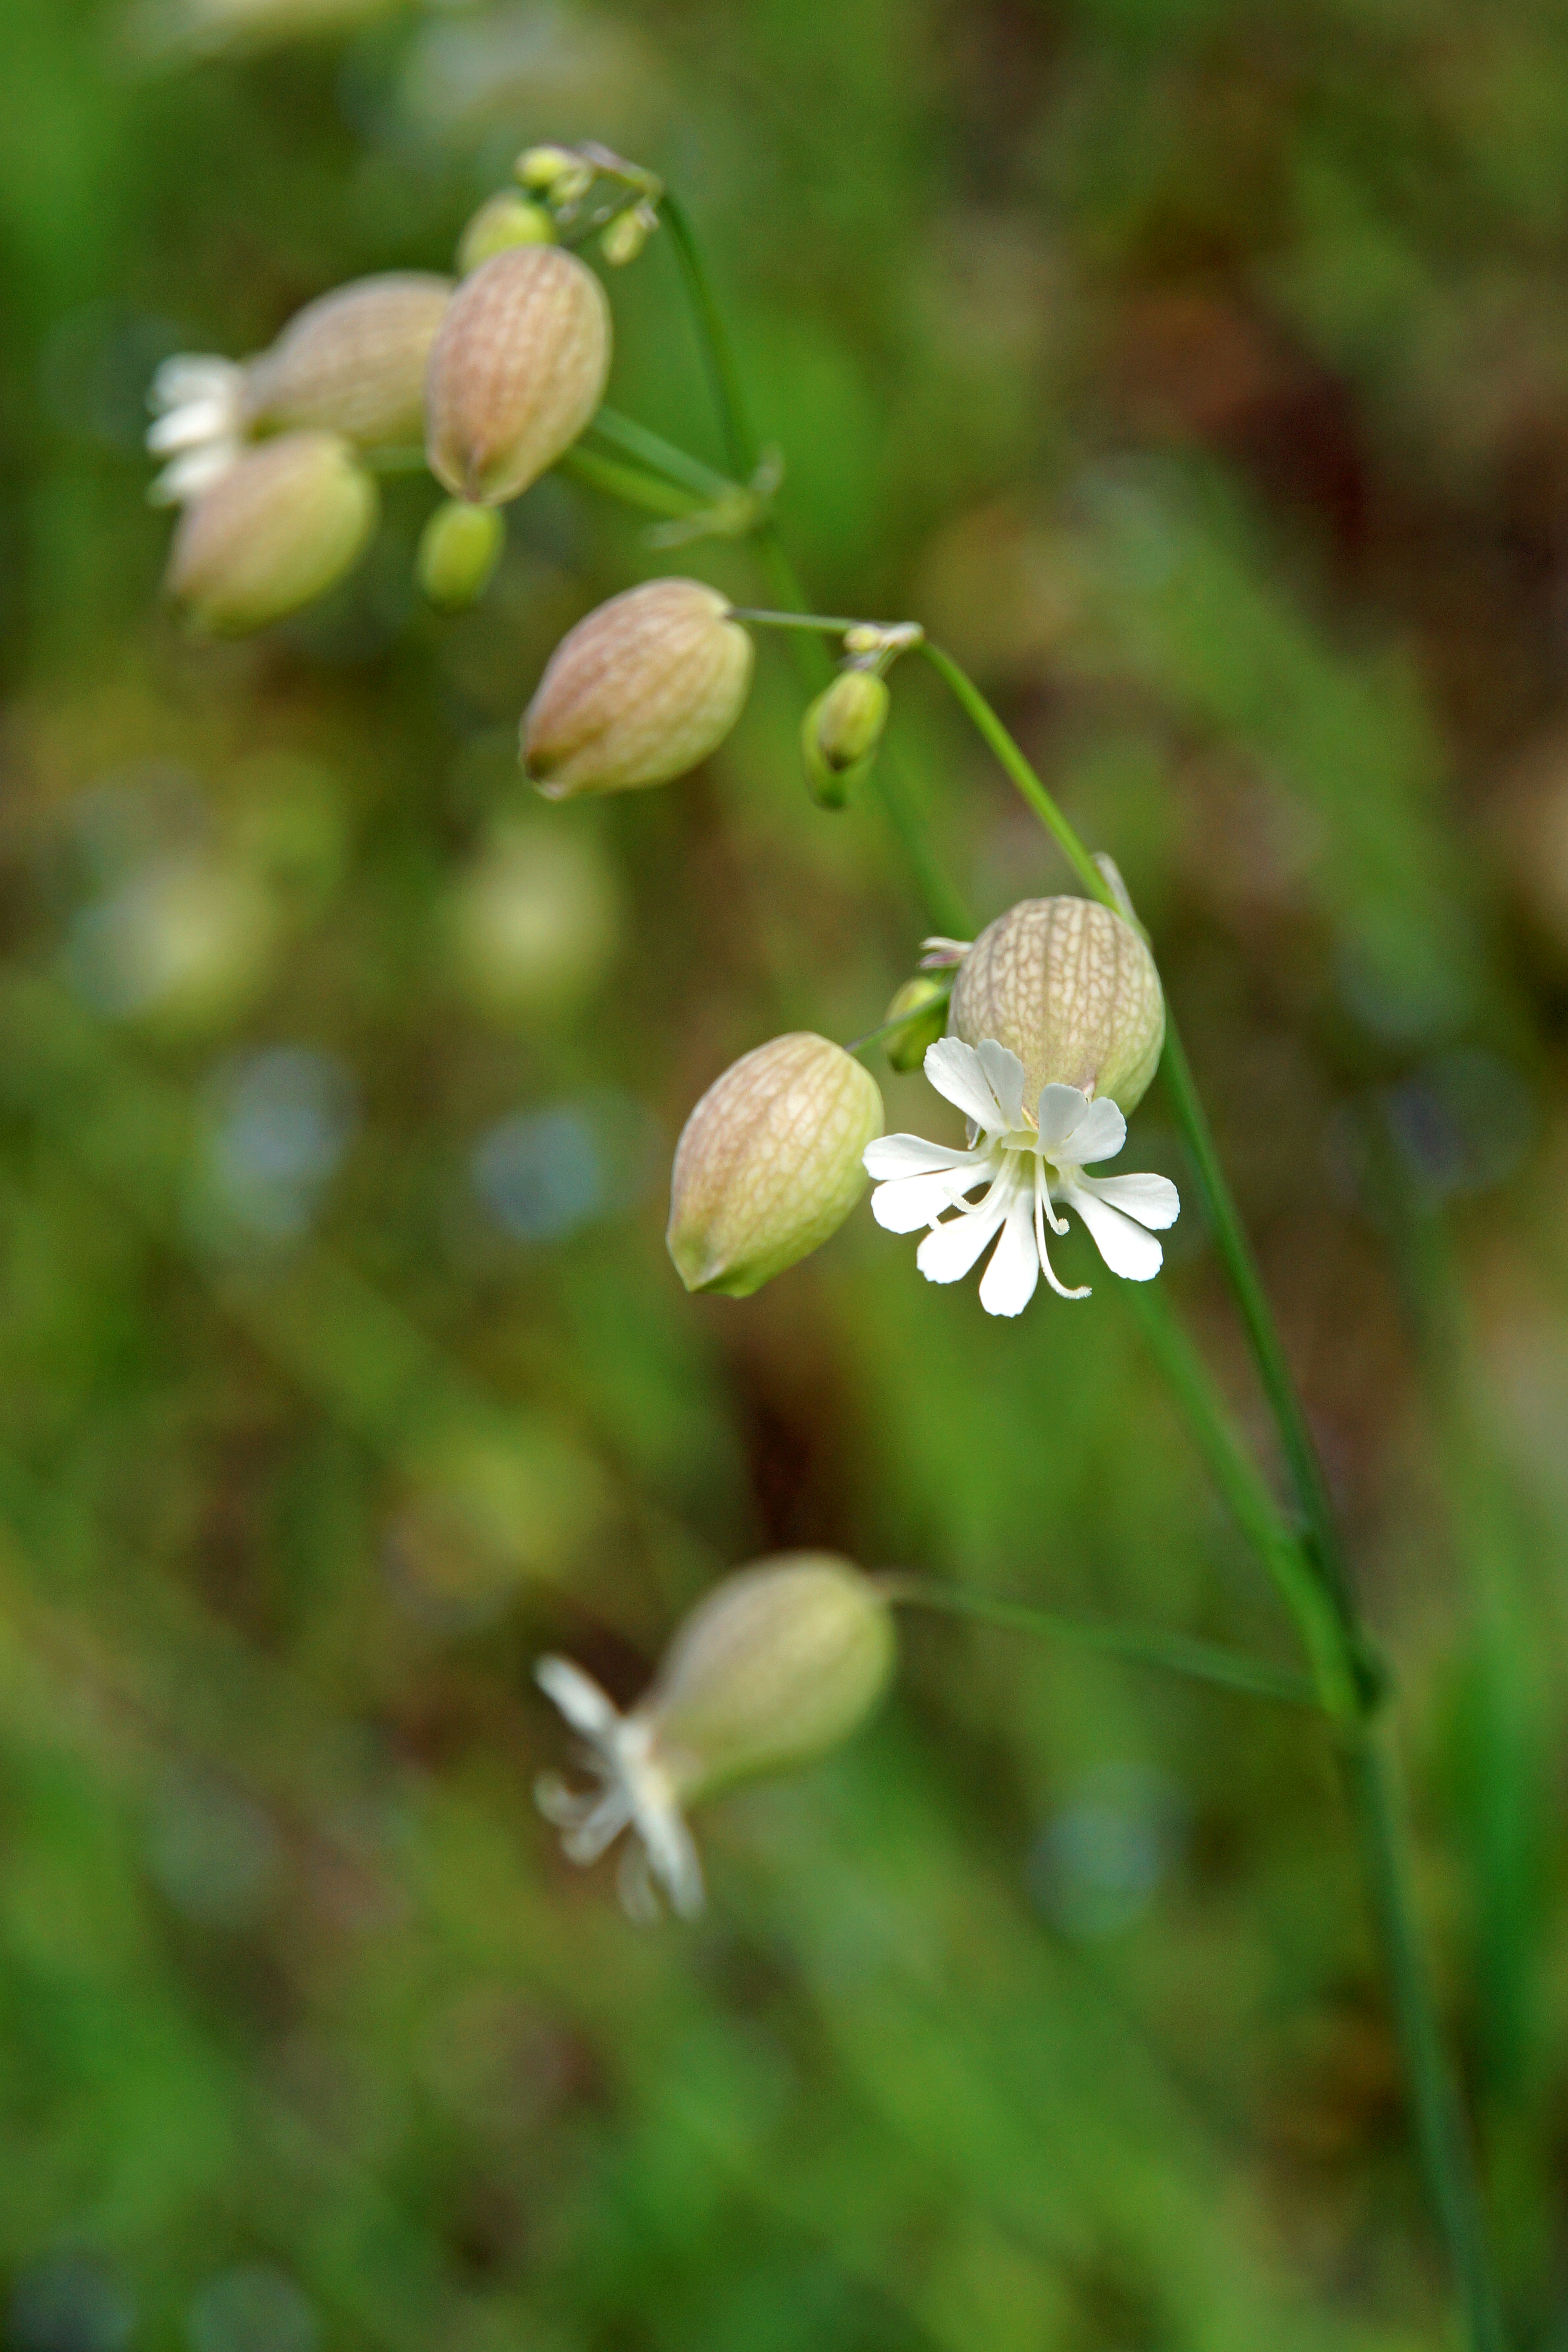 File:Small and delicate flower on Plitvice.jpg - Wikimedia Commons